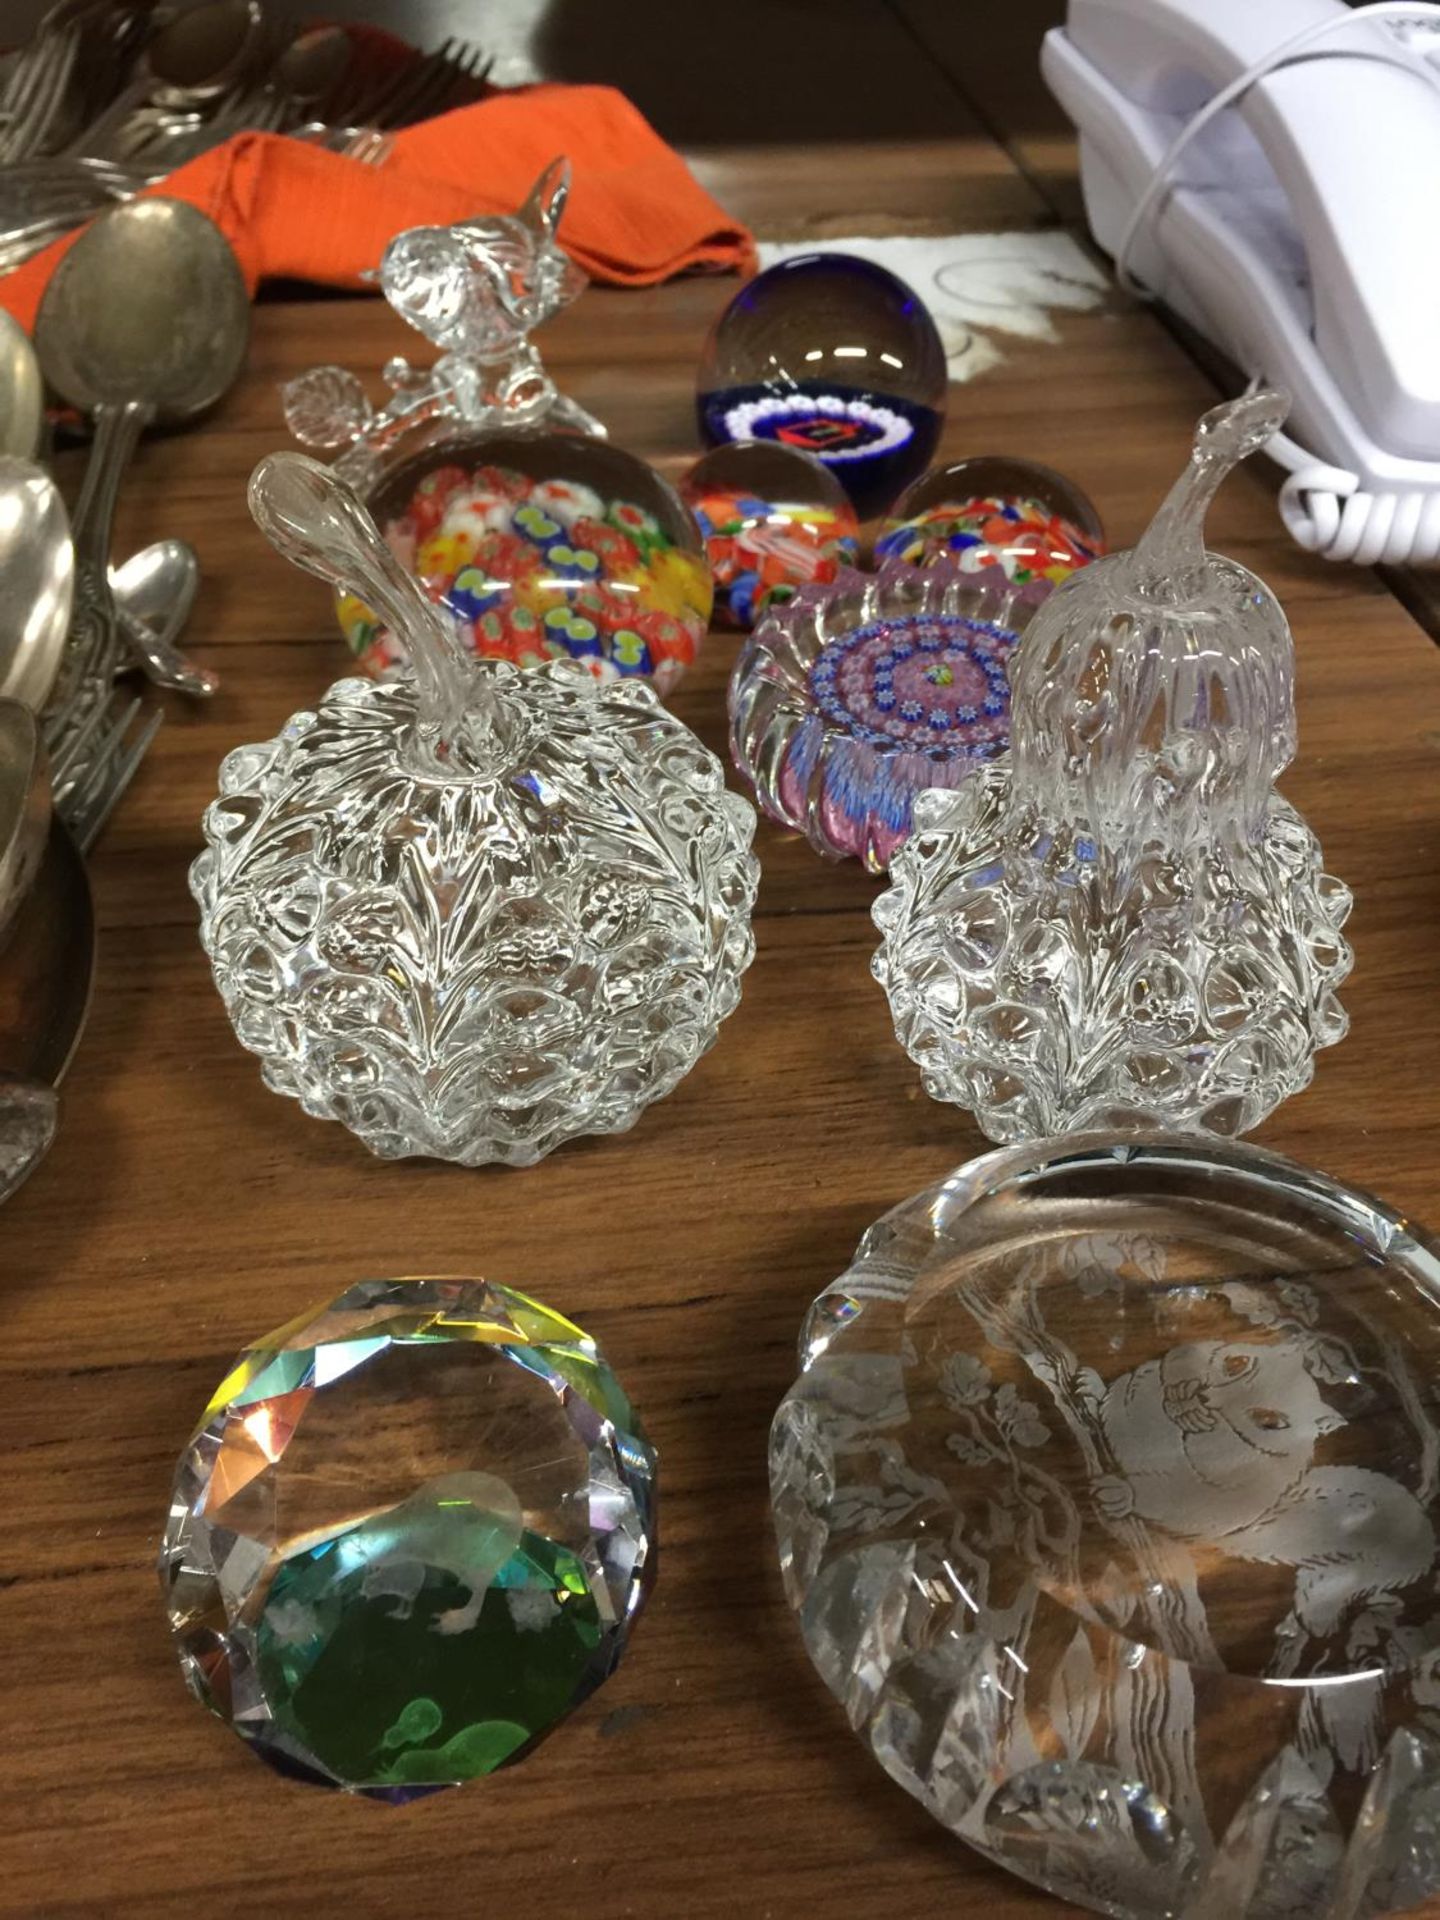 A QUANTITY OF GLASS PAPERWEIGHTS INCLUDING MILLEFIORI STYLE, FRUIT SHAPES, ETC - Image 2 of 3